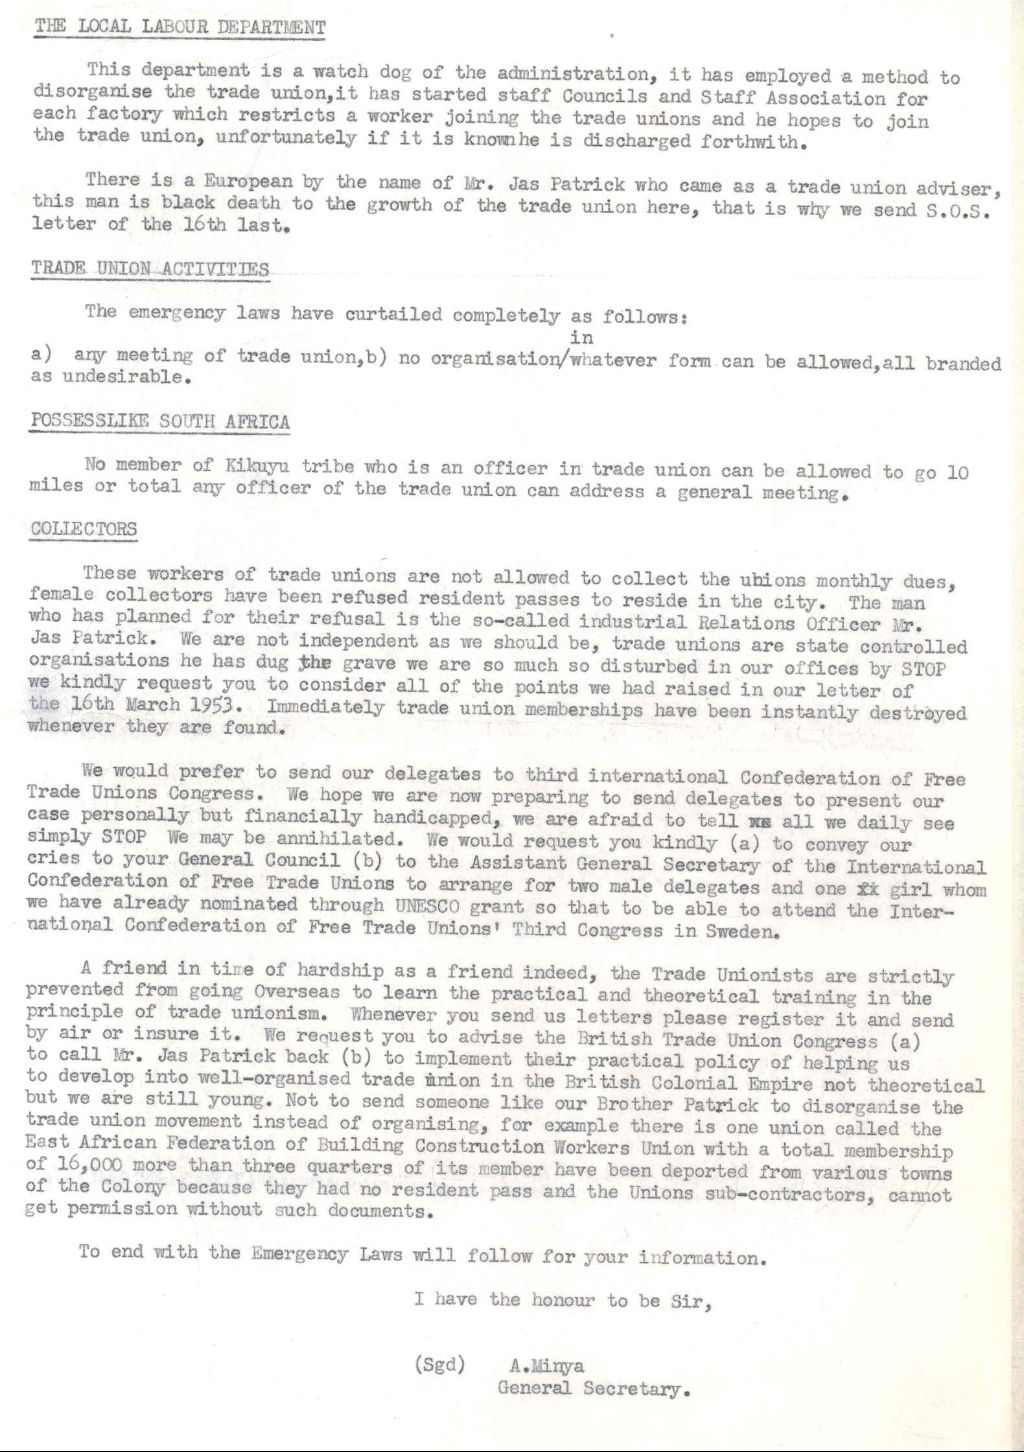 Copy of letter regarding the arrest of trade union leaders in Nairobi, 1953